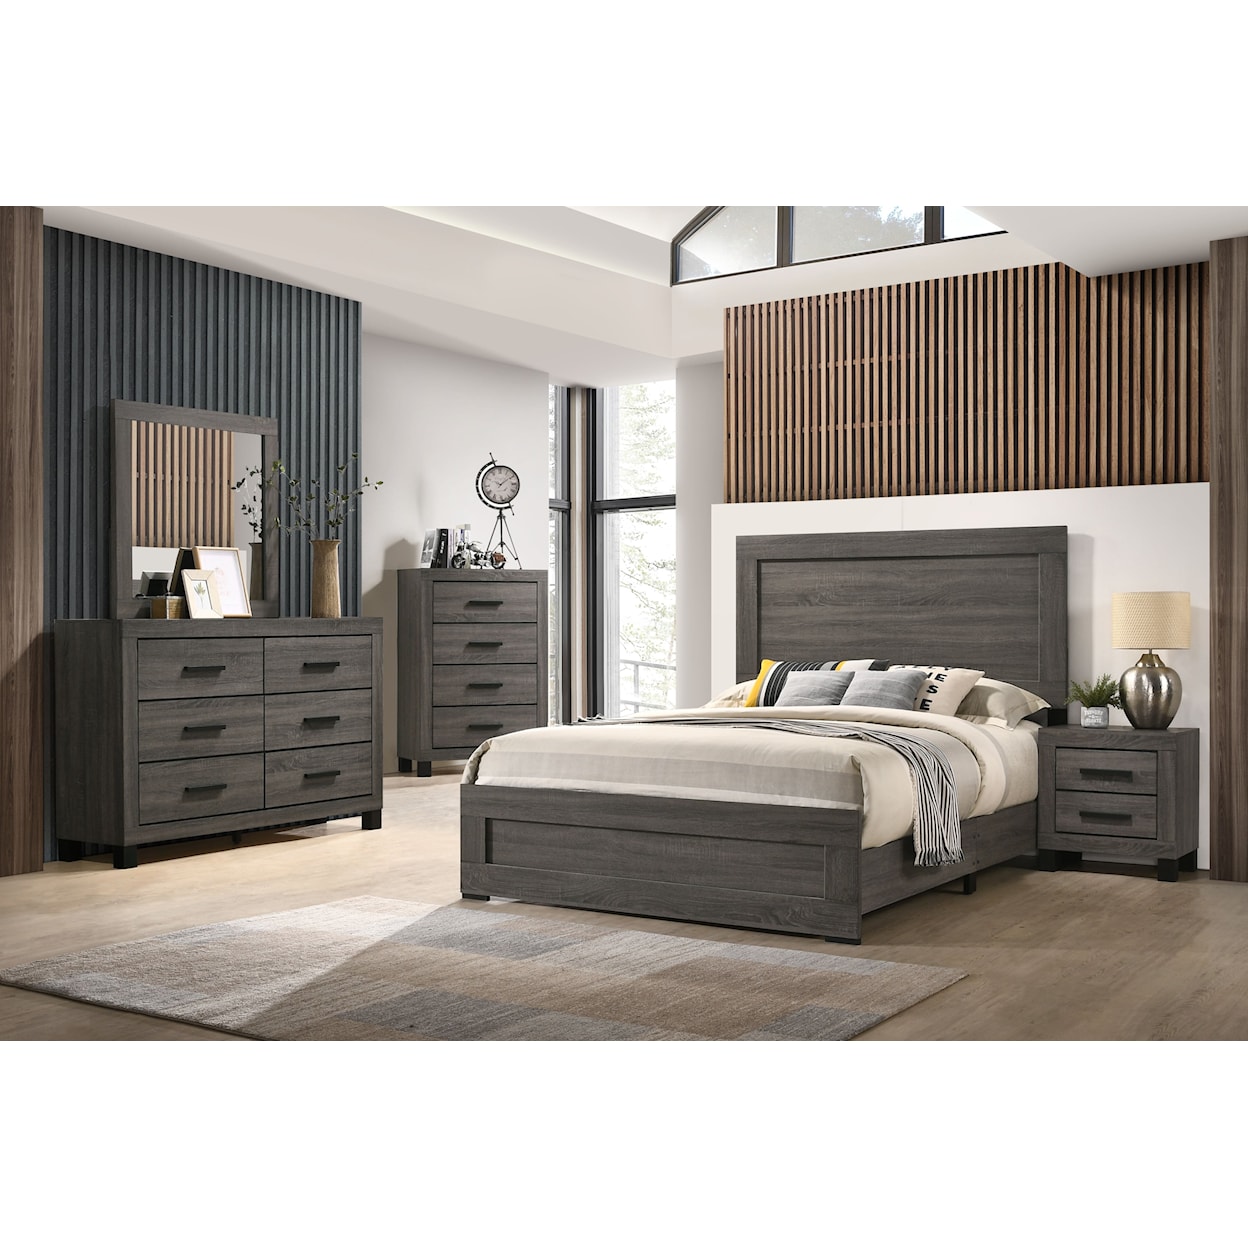 Lifestyle 8321A Queen Bedroom Group